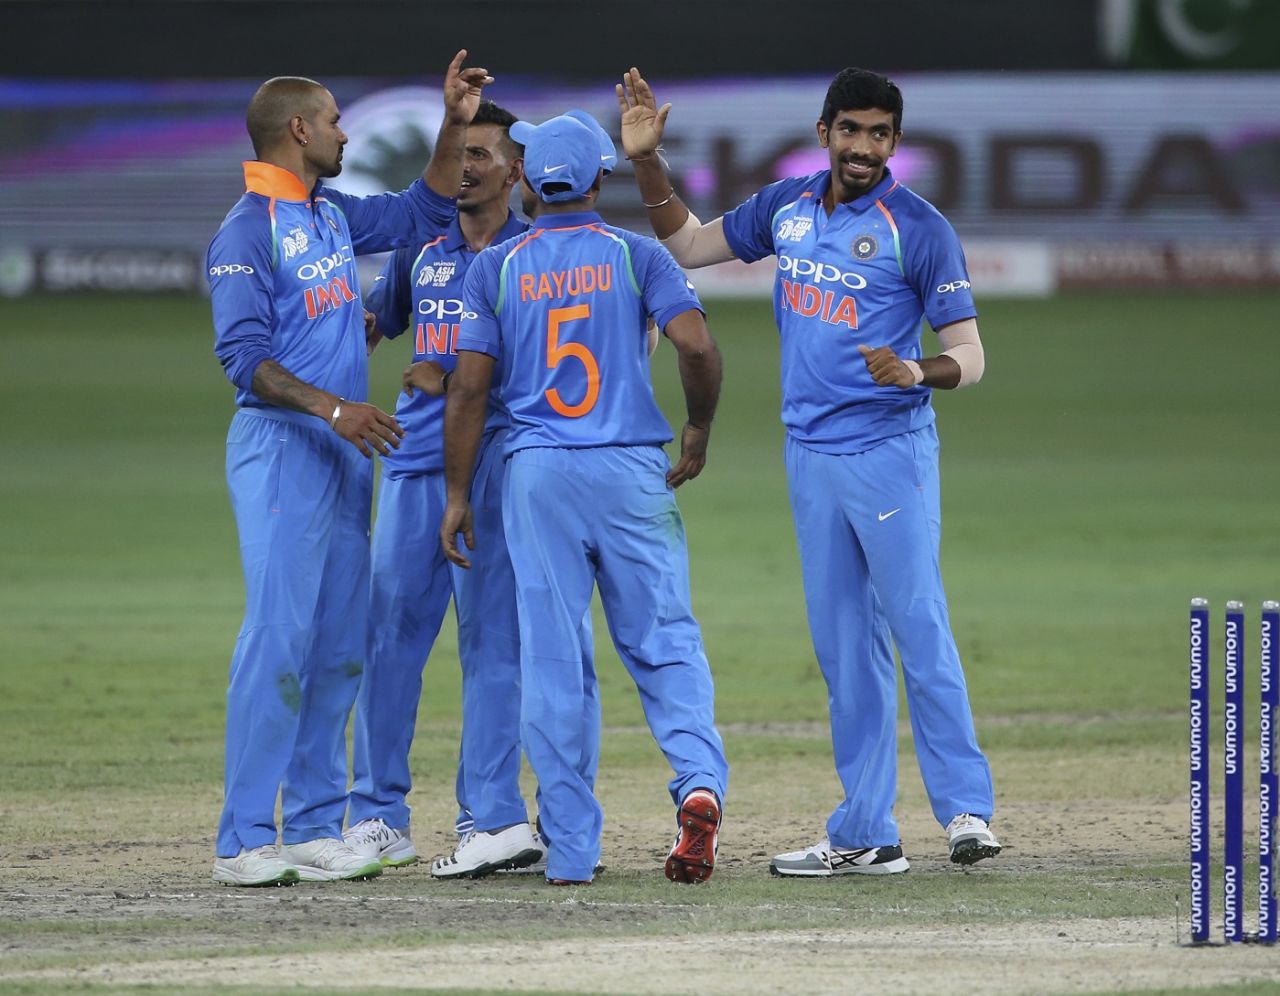 Jasprit Bumrah and the Indian team celebrate after dismissing Pakistan out for 162, India v Pakistan, Asia Cup 2018, Dubai, September 19, 2018